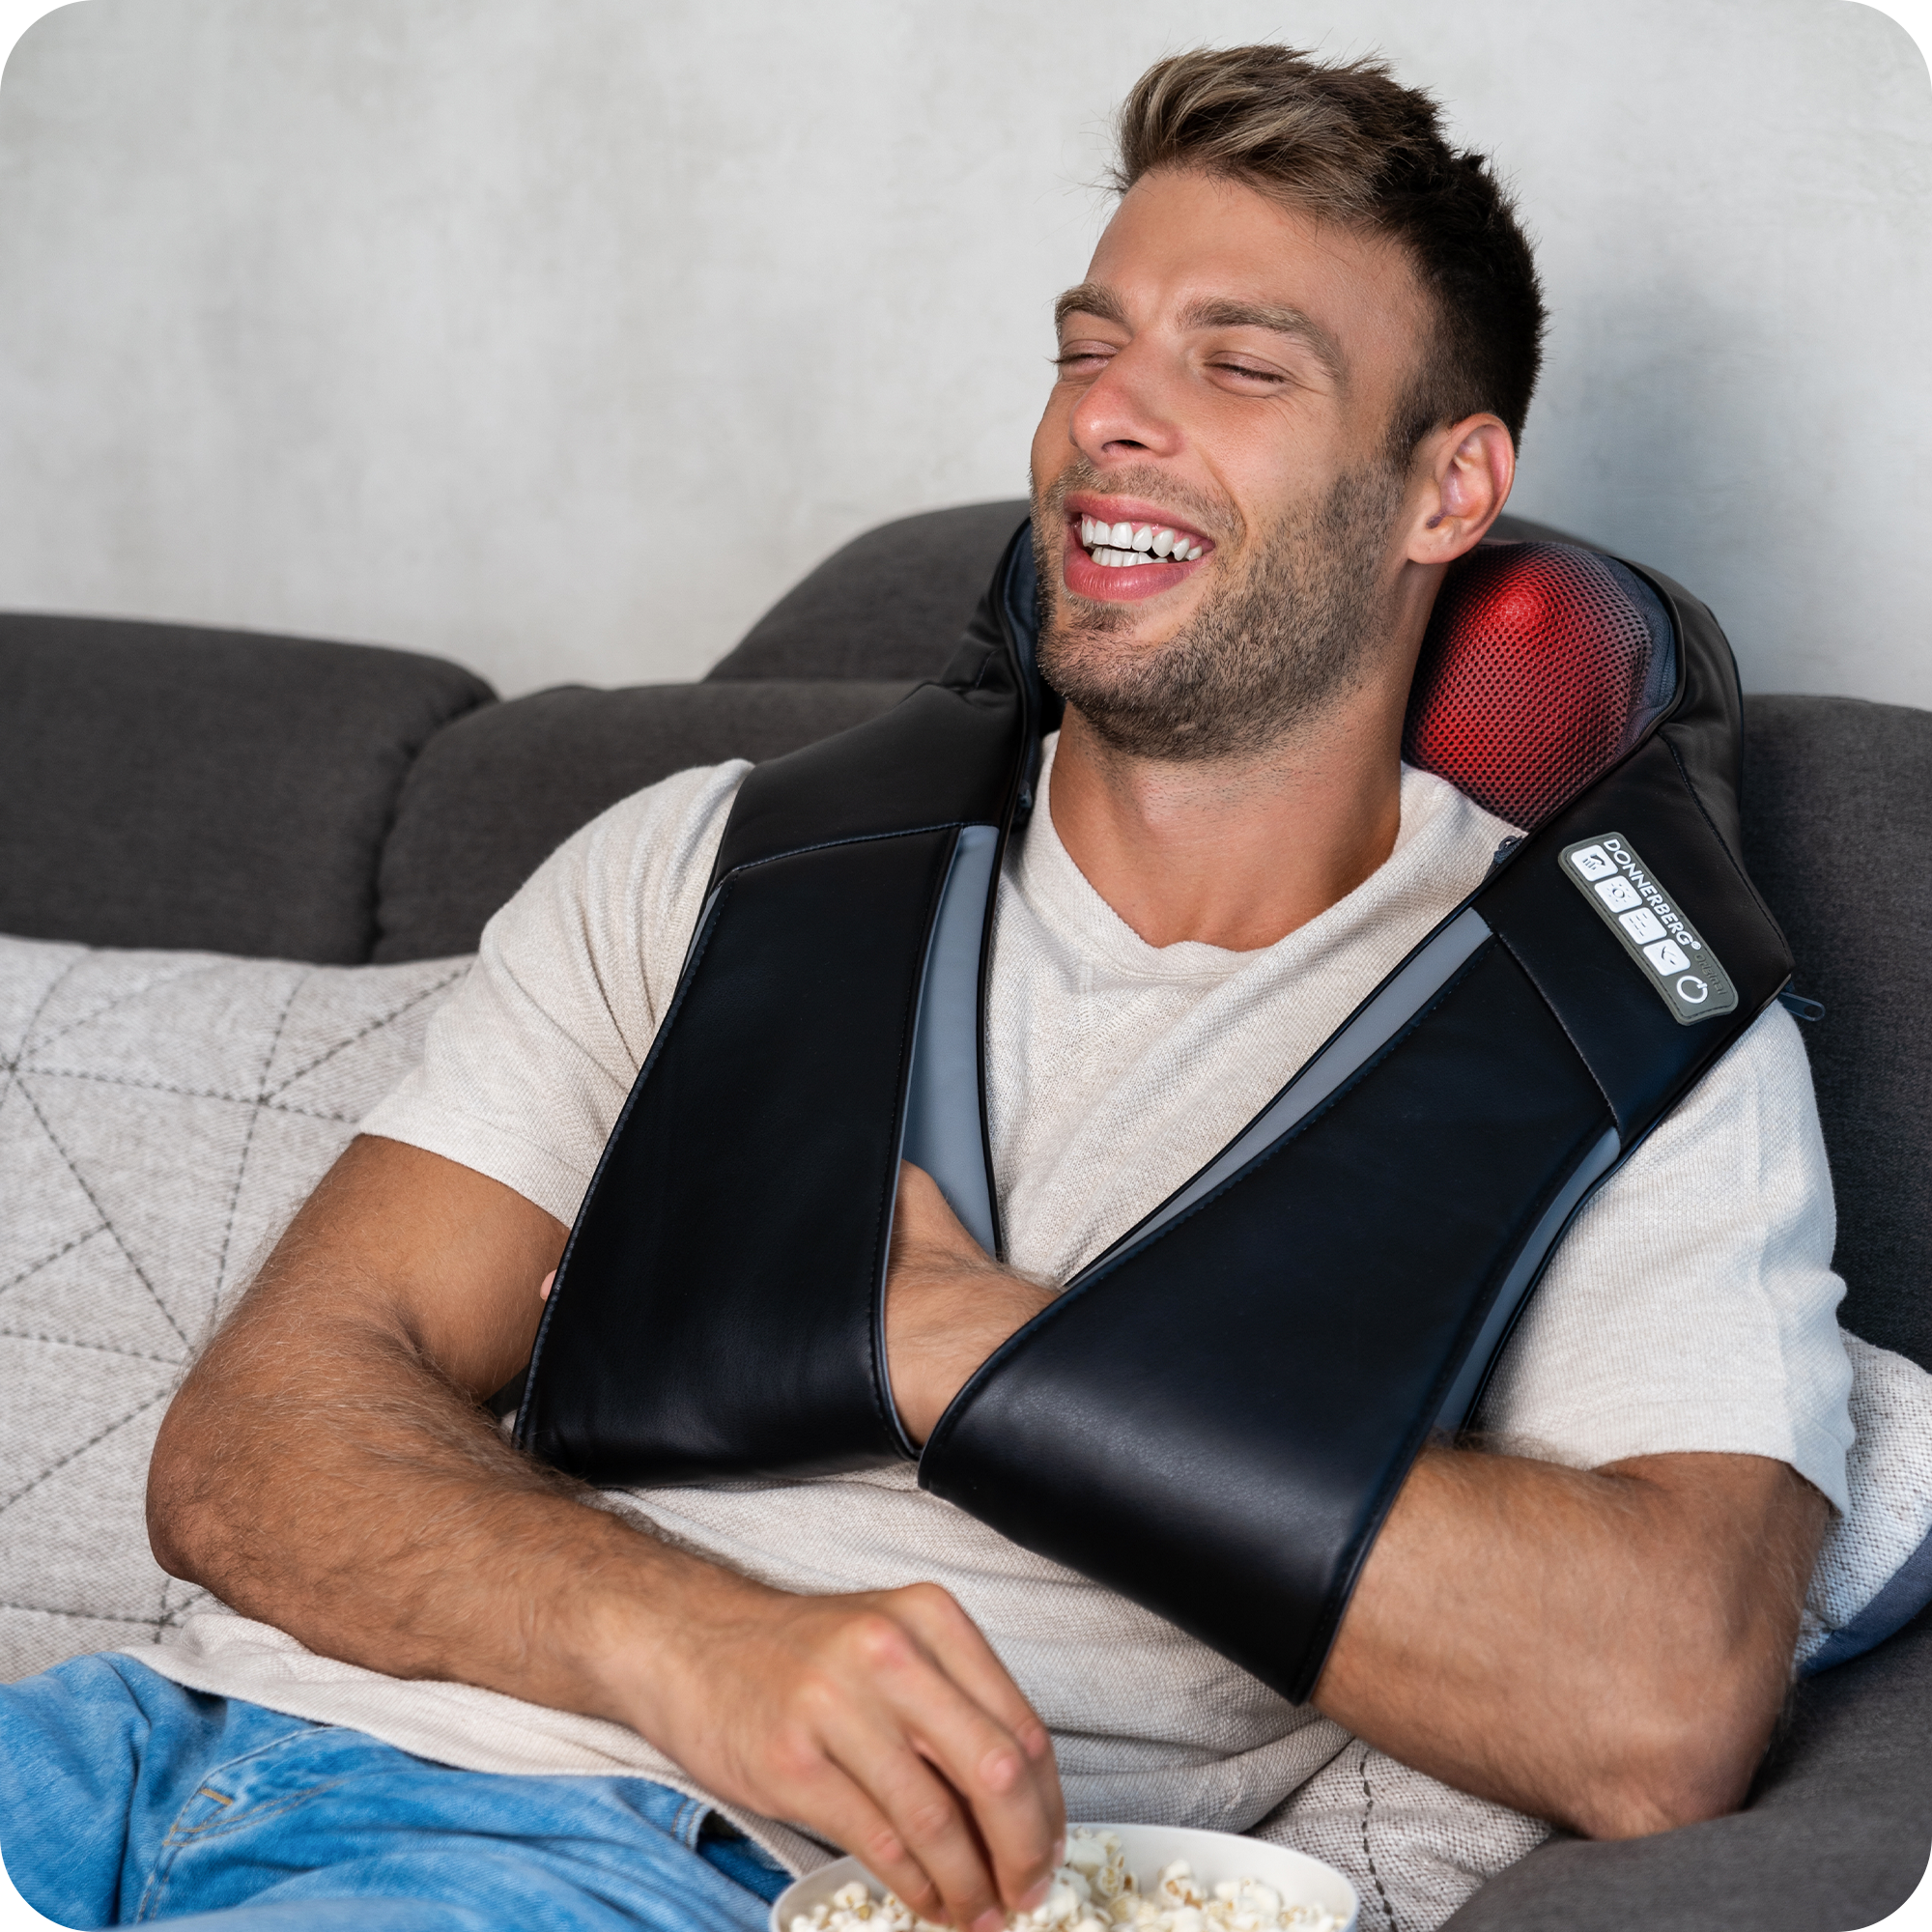 smiling young man eating popcorn and relaxing with donnerberg shiatsu neck and back massager